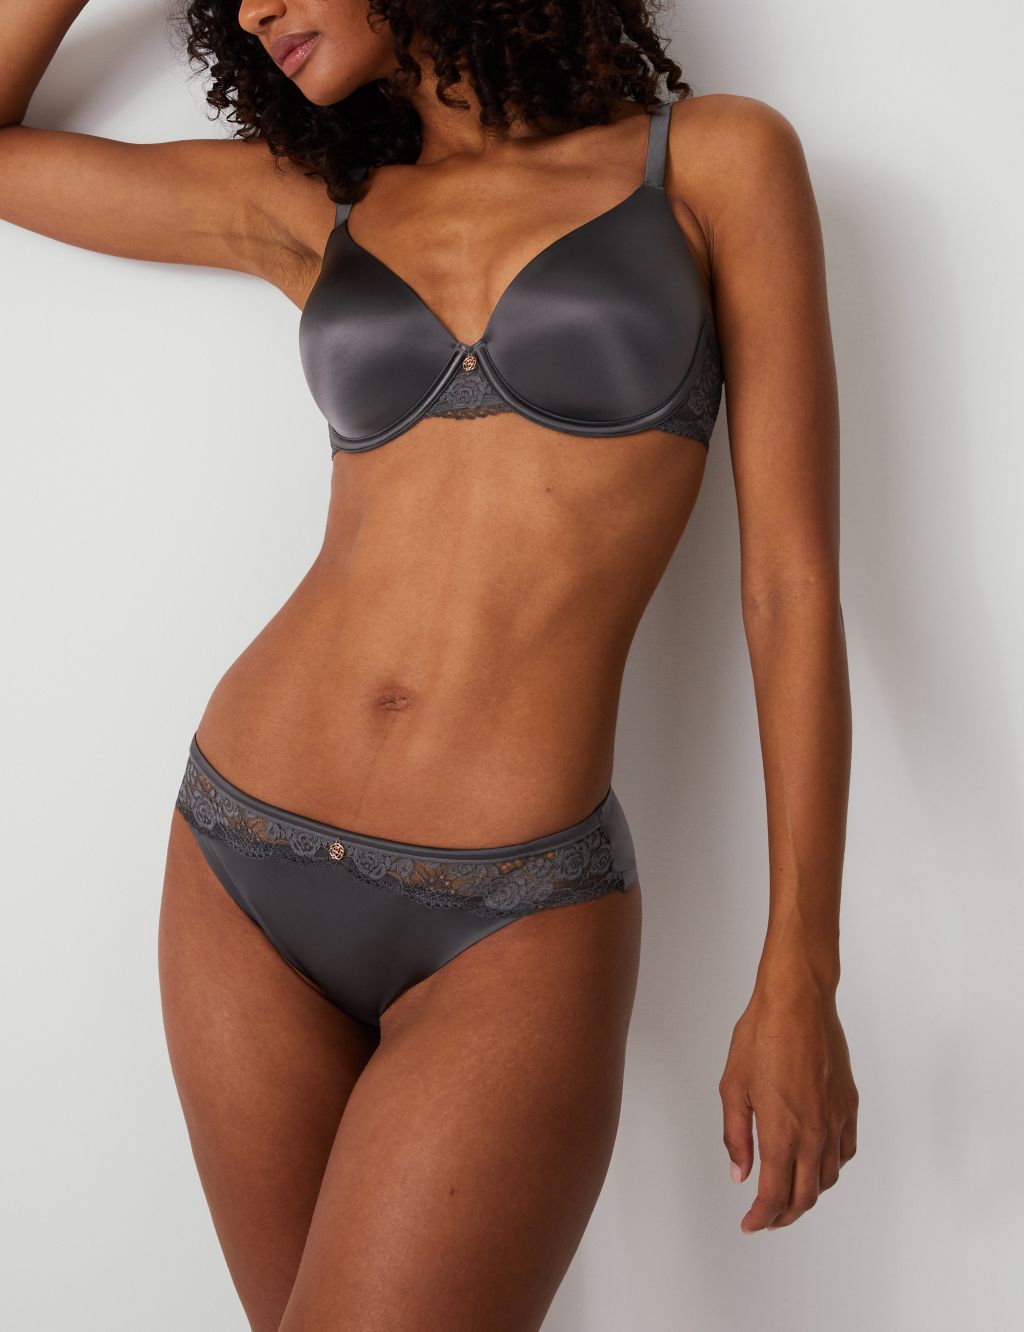 Cacique's Back Smoothing Bra Video, Check out the video introducing new  colors and an unlined version of our new Cacique Back Smoothing Bra!